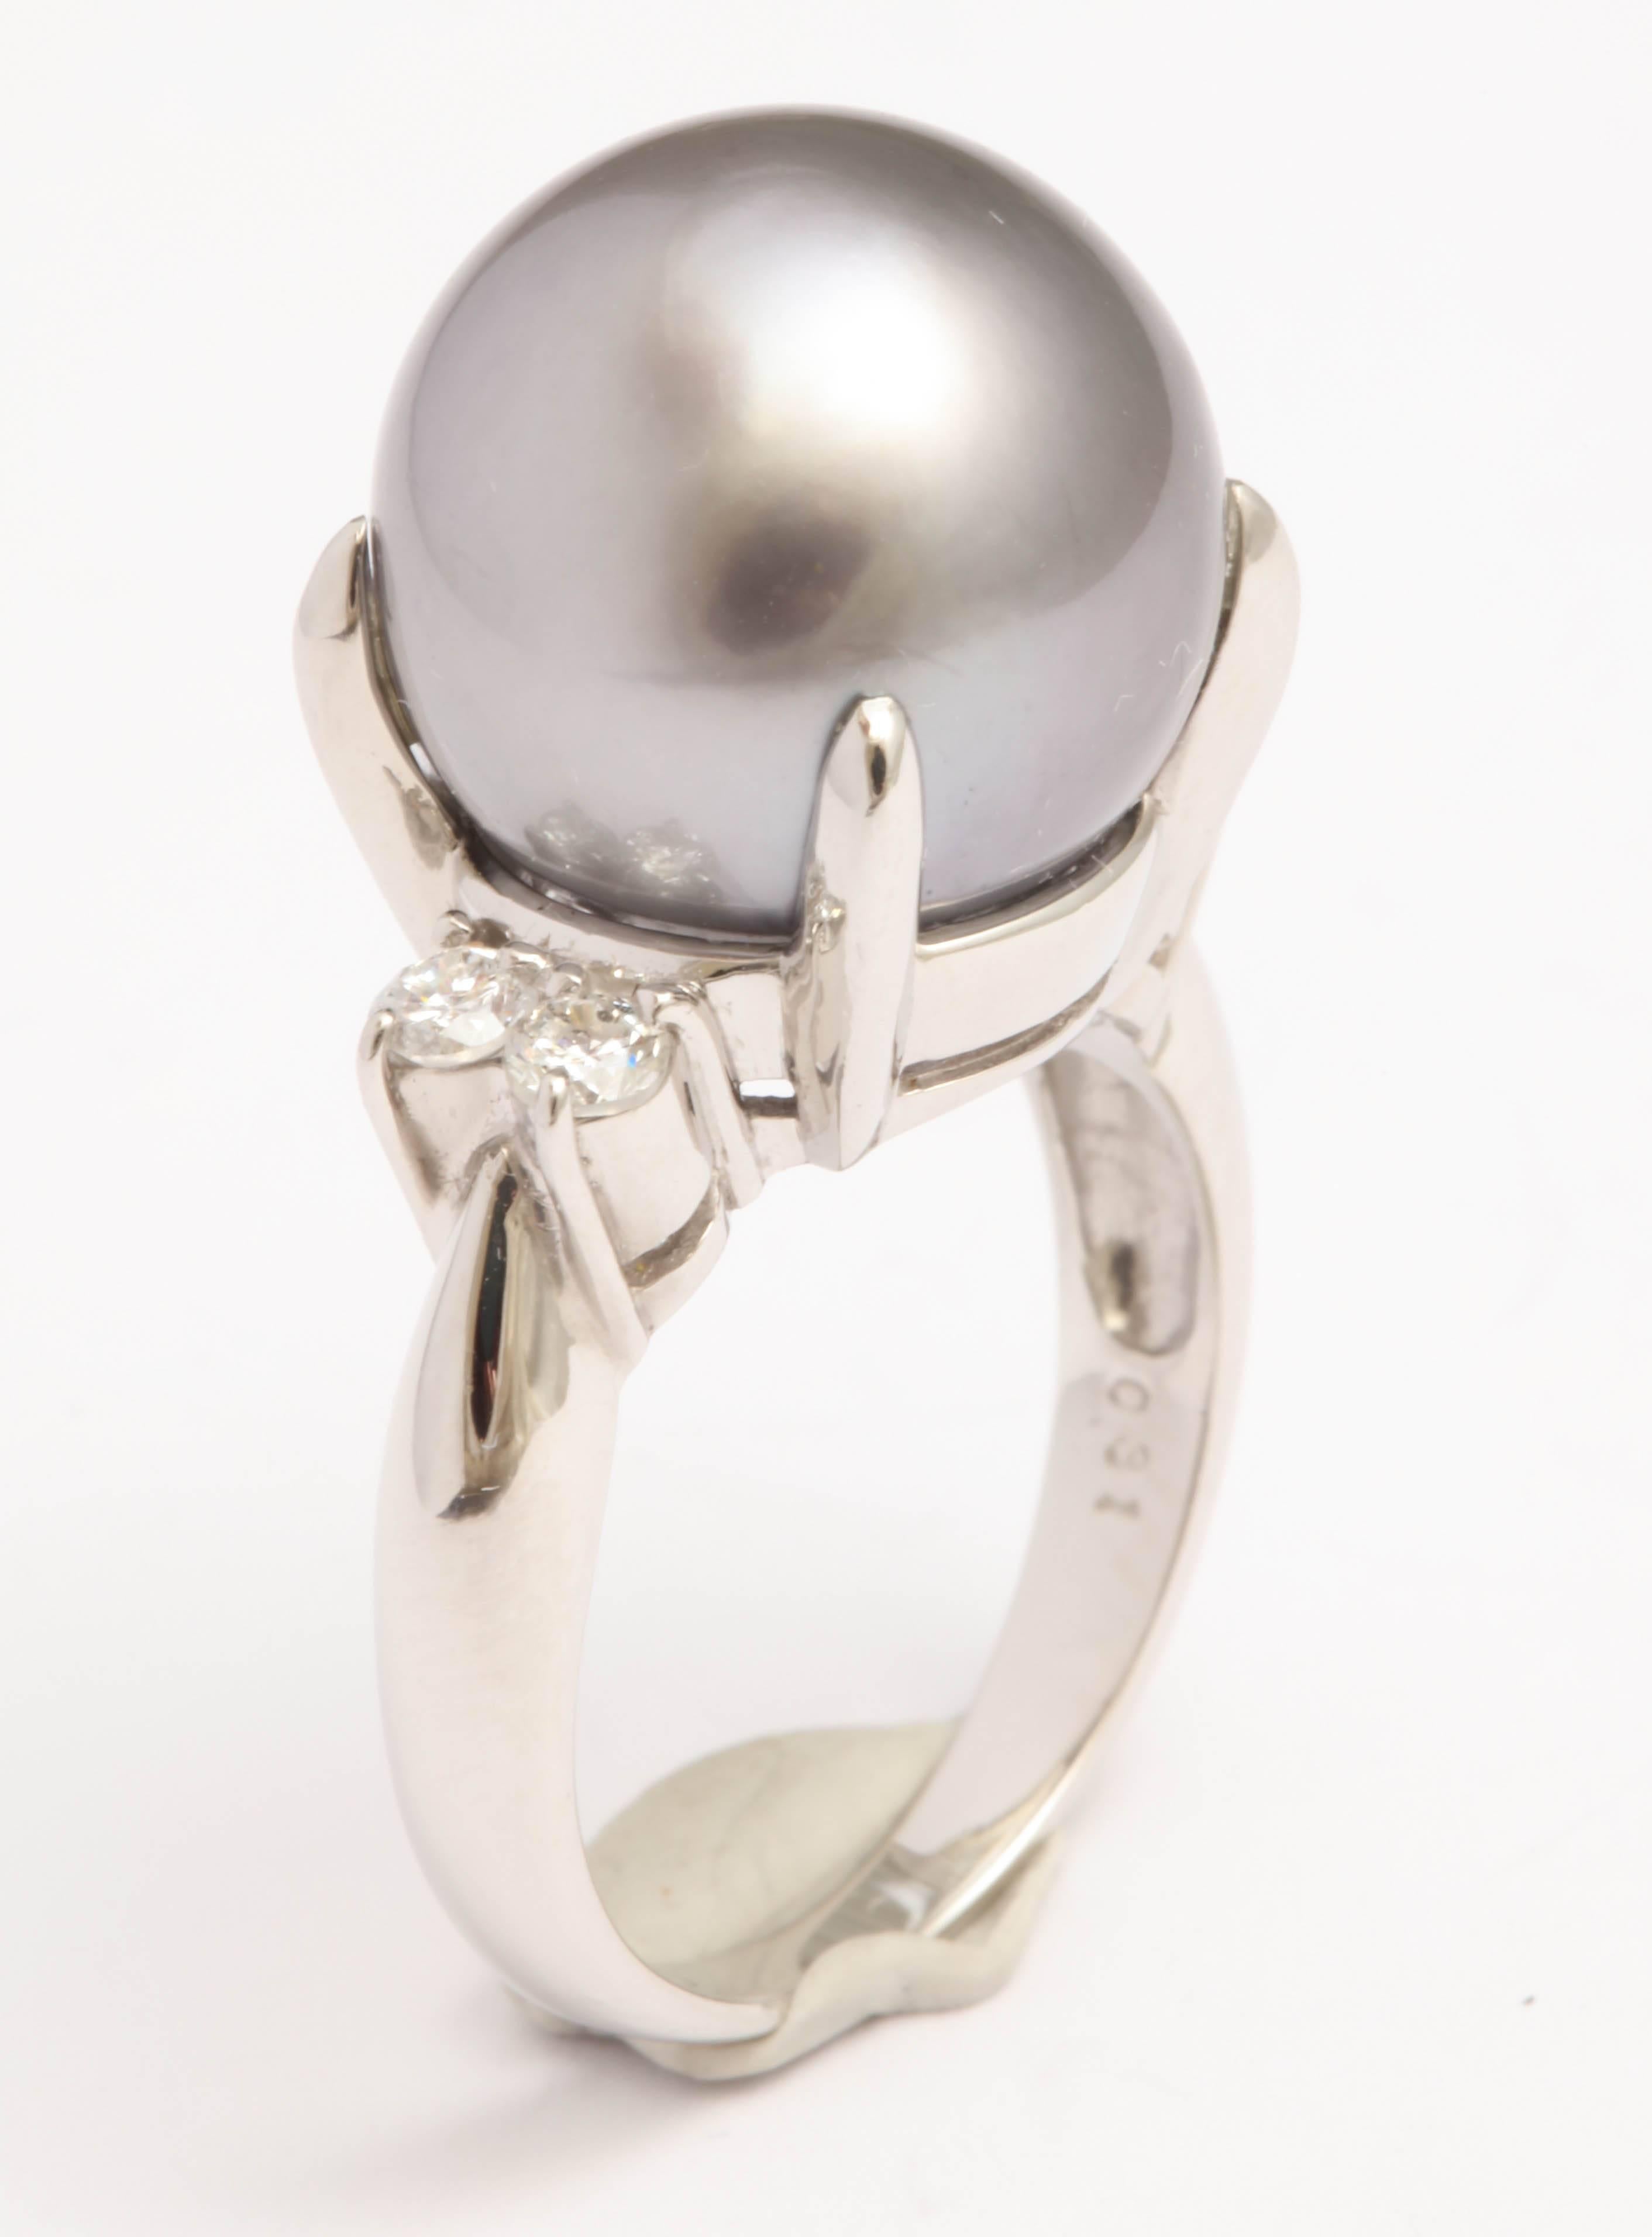 Platinum and 4 Diamond Ring  giving  an updated look to a traditional Pearl & Diamond Ring.
   Japanese made and centered on beautiful 13mm  Grey South Sea Pearl with 2 round full cut stones on either side - totaling 25pts - just enough to